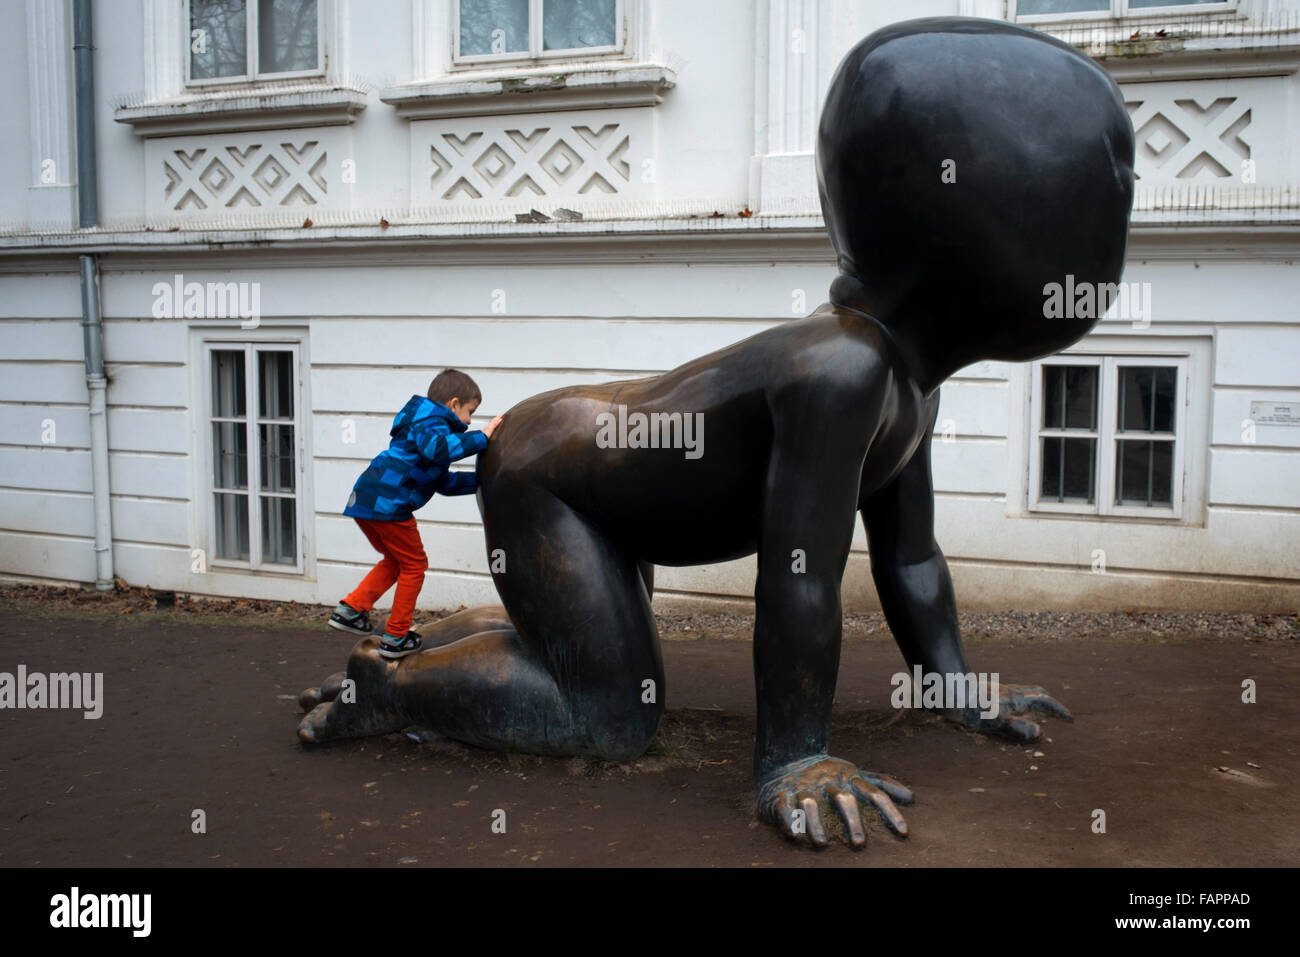 Baby crawling giant Kampa Island. Prague. Here are three bronze sculptures by Czech artist David Cerny, titled 'Babies', three g Stock Photo